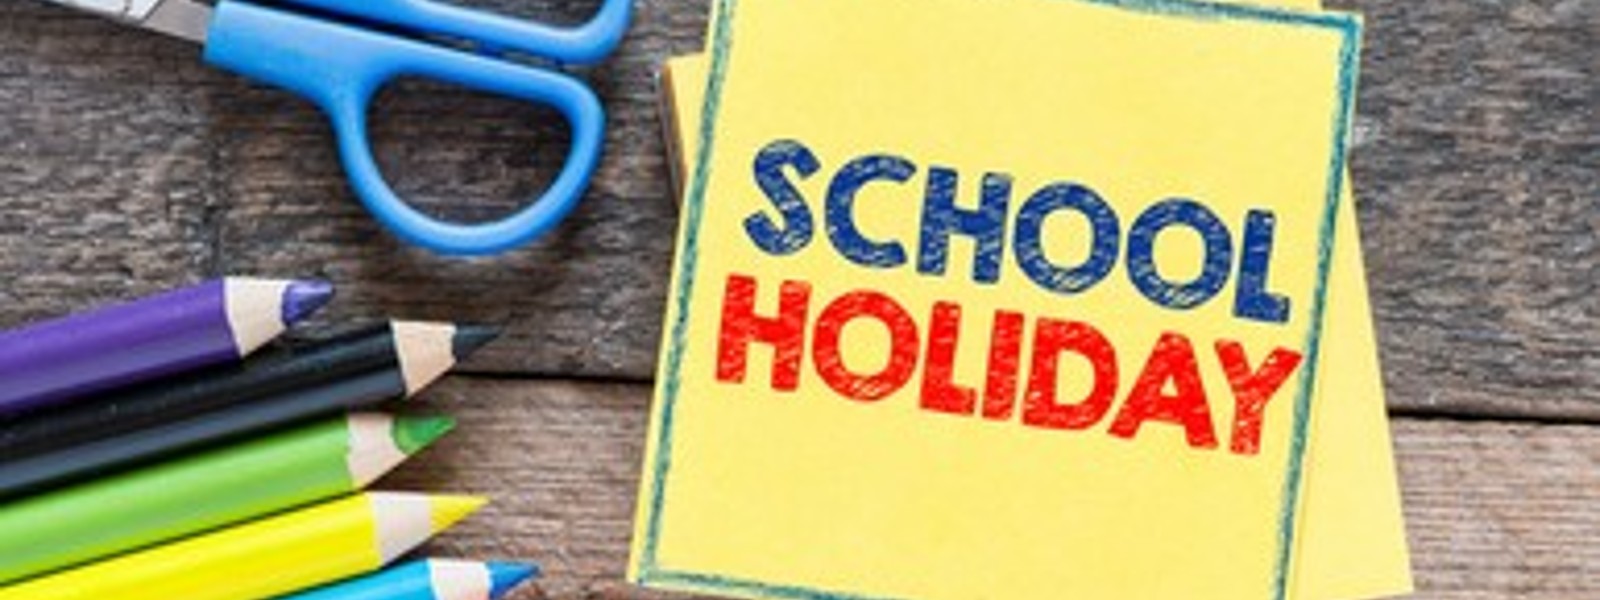 Friday (20) declared a holiday for State & State-approved private schools